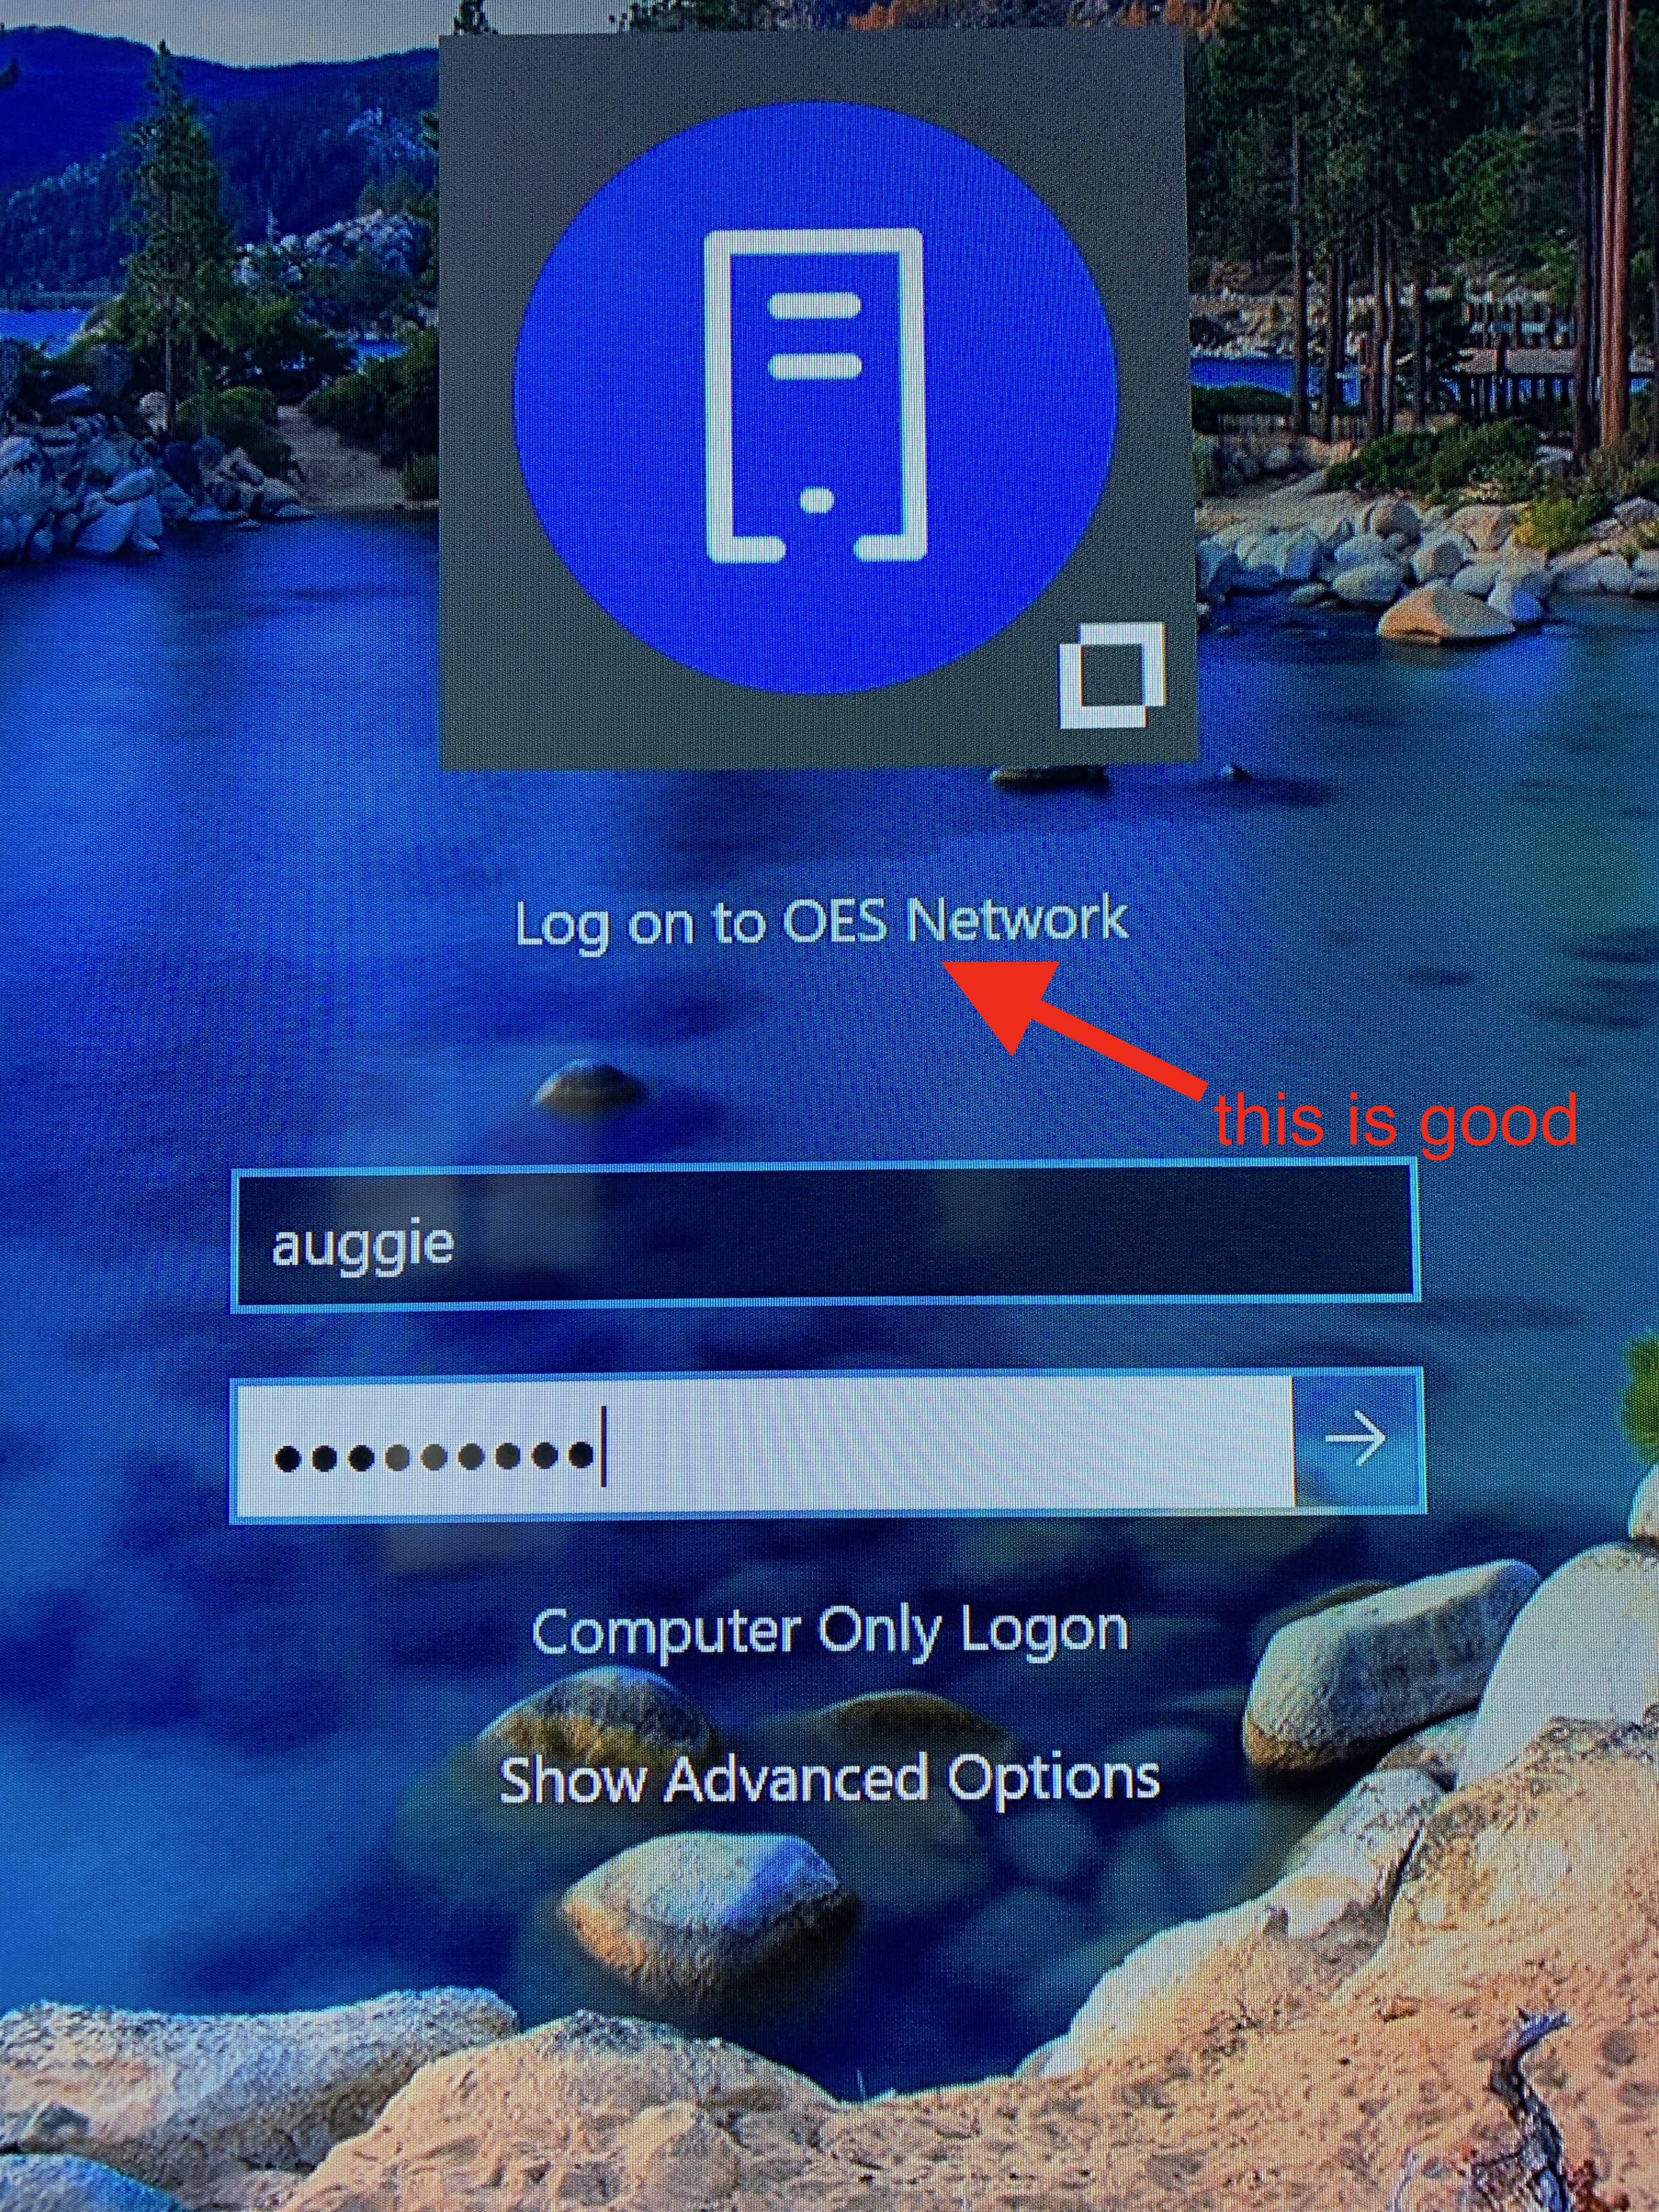 Windows 10 login screen showing "Log on to OES Network" being a good thing